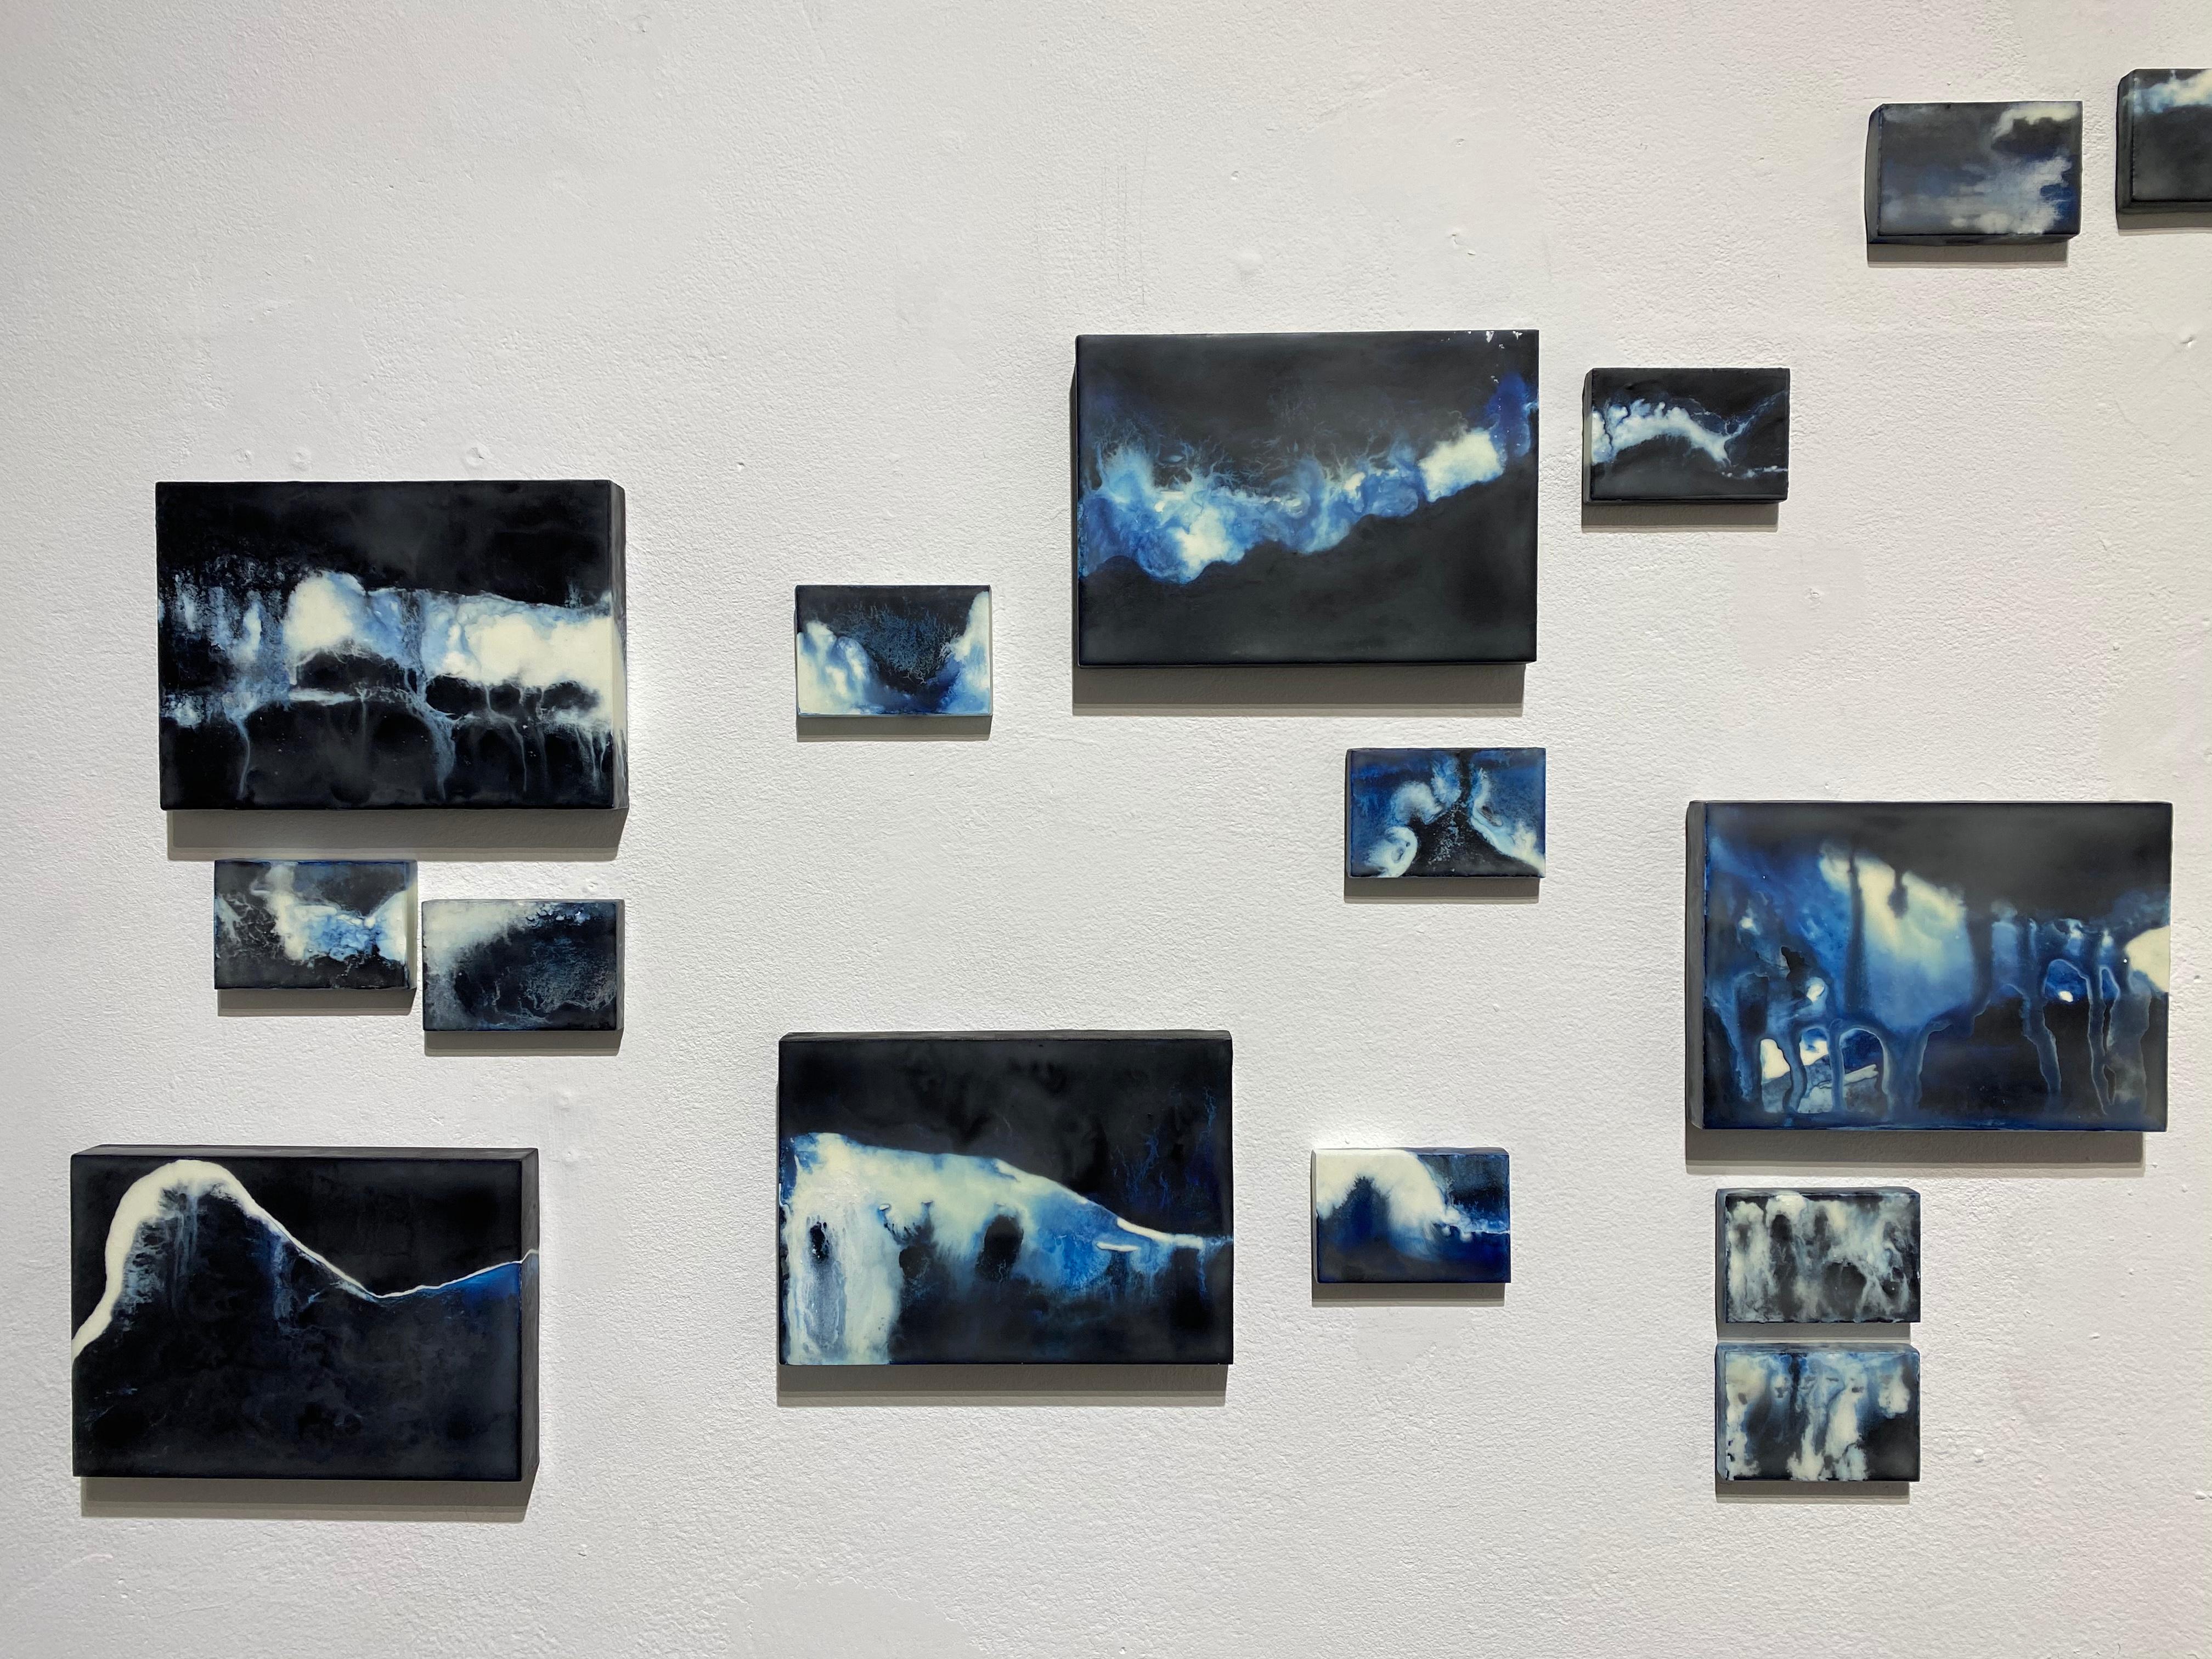 This multi panel installation evokes a visual imagery of flowing water, with deep blues, dark indigo and white.  Each panel is positioned to relate to each other as a course of water running through the visual layout of the painting installation. 